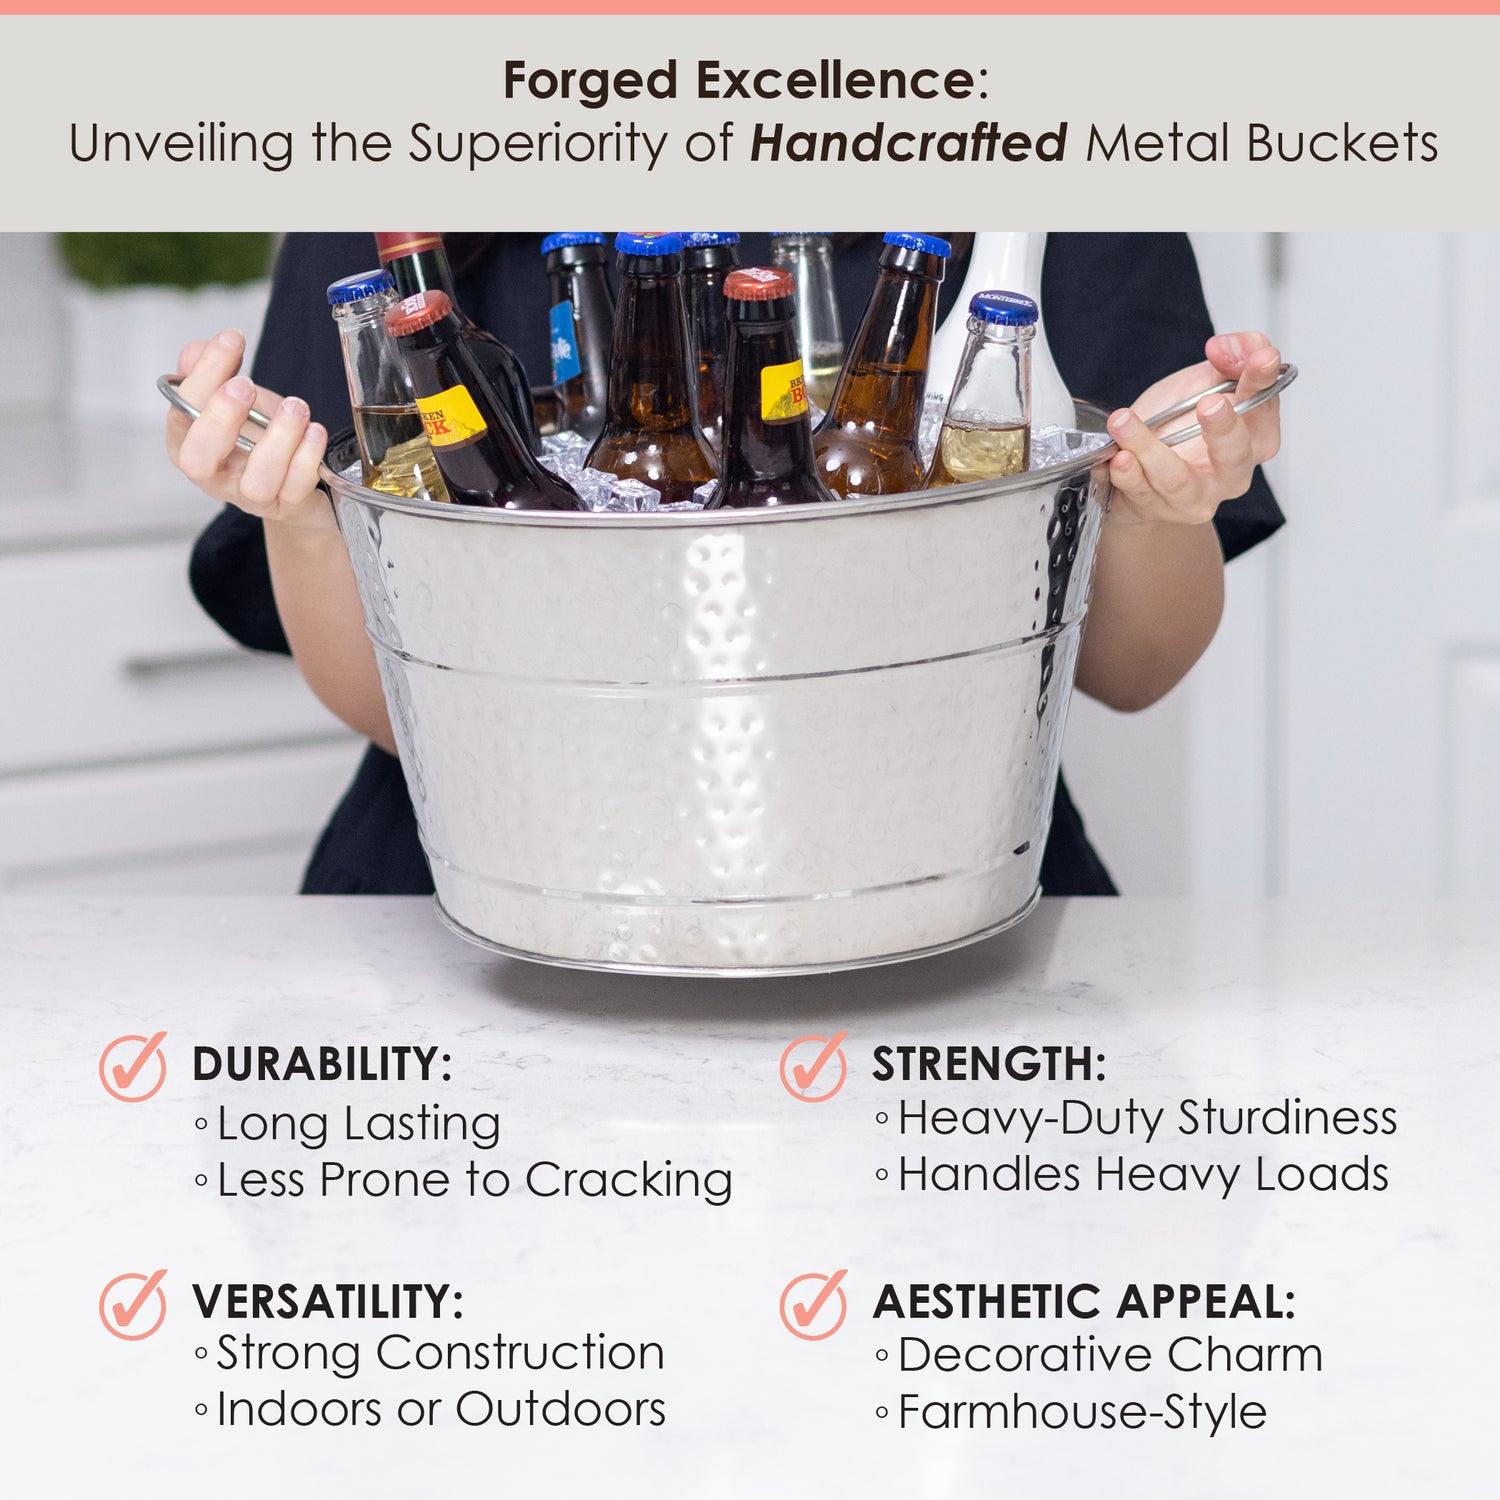 Inner ice tub floor is sealed with a clear sealant to prevent leaking and promote mess-free parties! This drink bucket allows you and your guests to party on without worries!